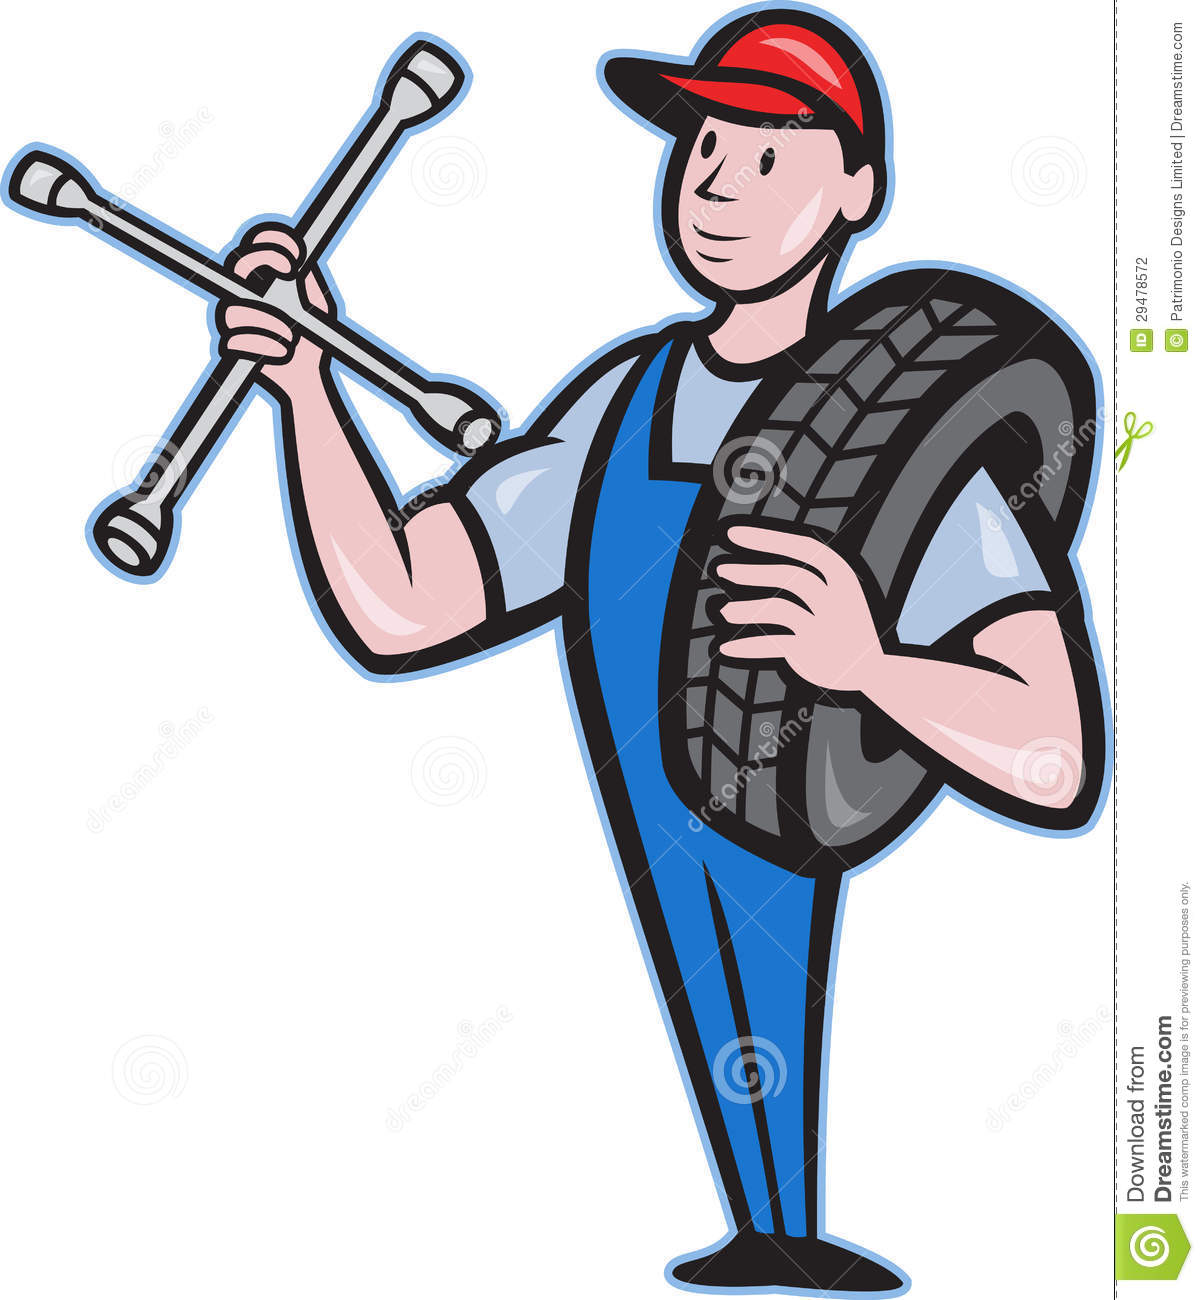 Illustration Of A Mechanic With Tire Socket Wrench And Tire Standing